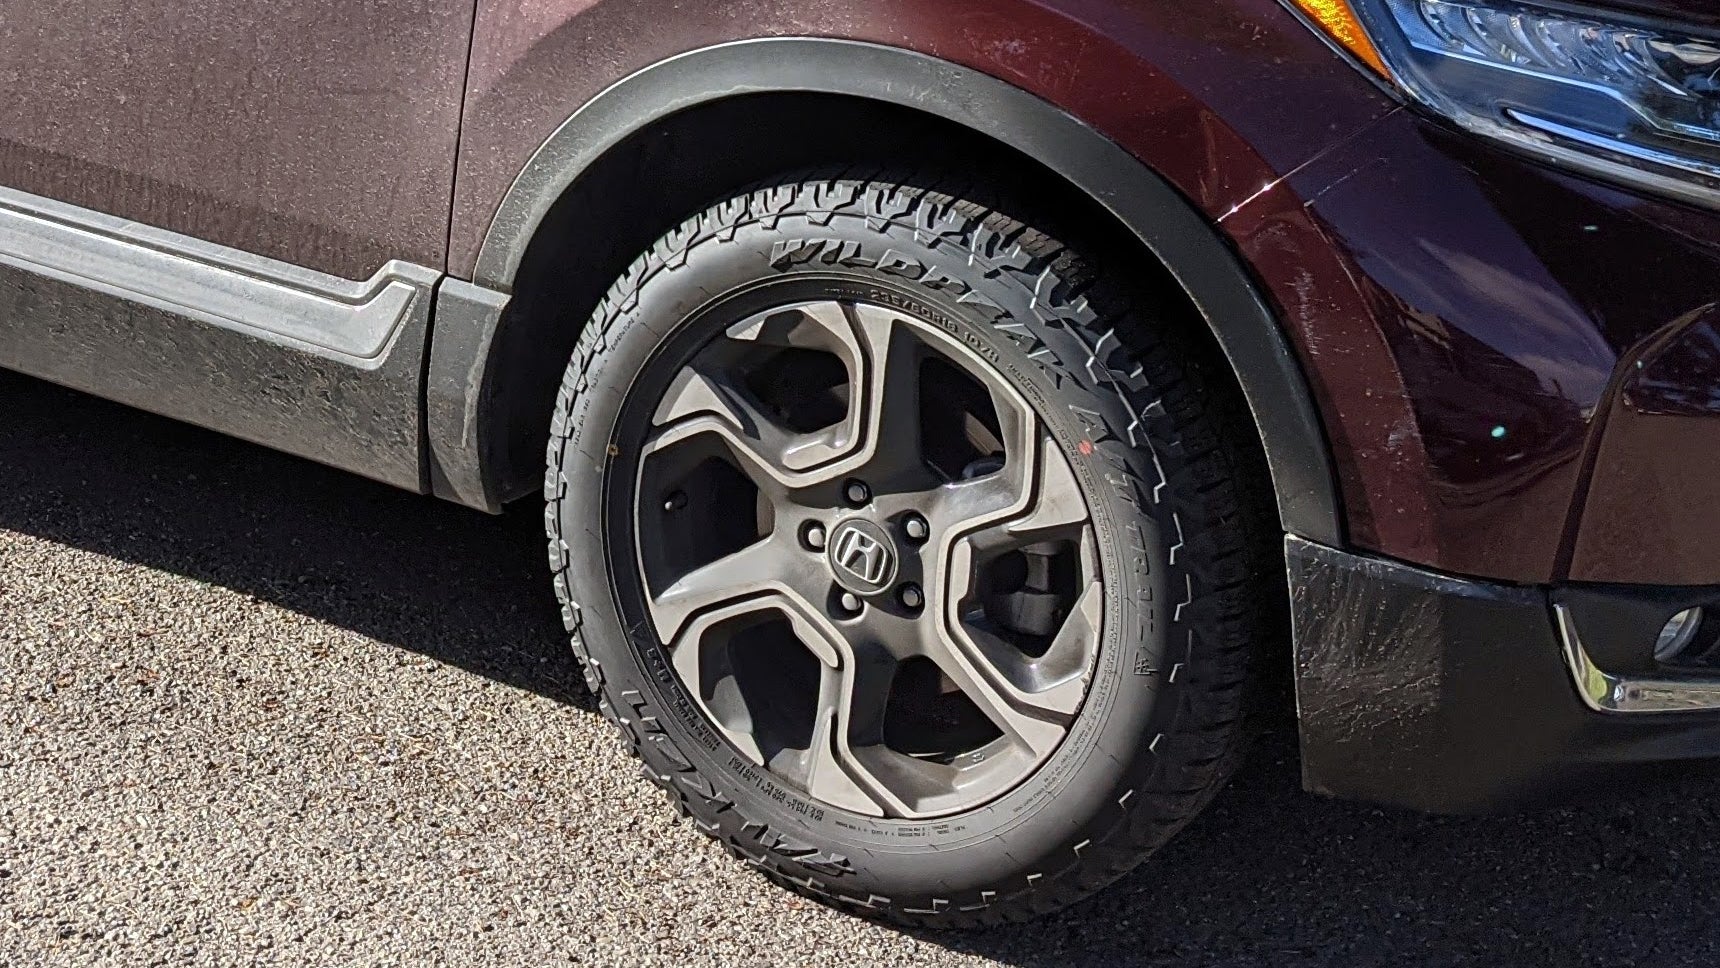 Depending on what type of road trip you plan to take, you might want to upgrade your tires. (Photo: Brent Rose/Gizmodo)